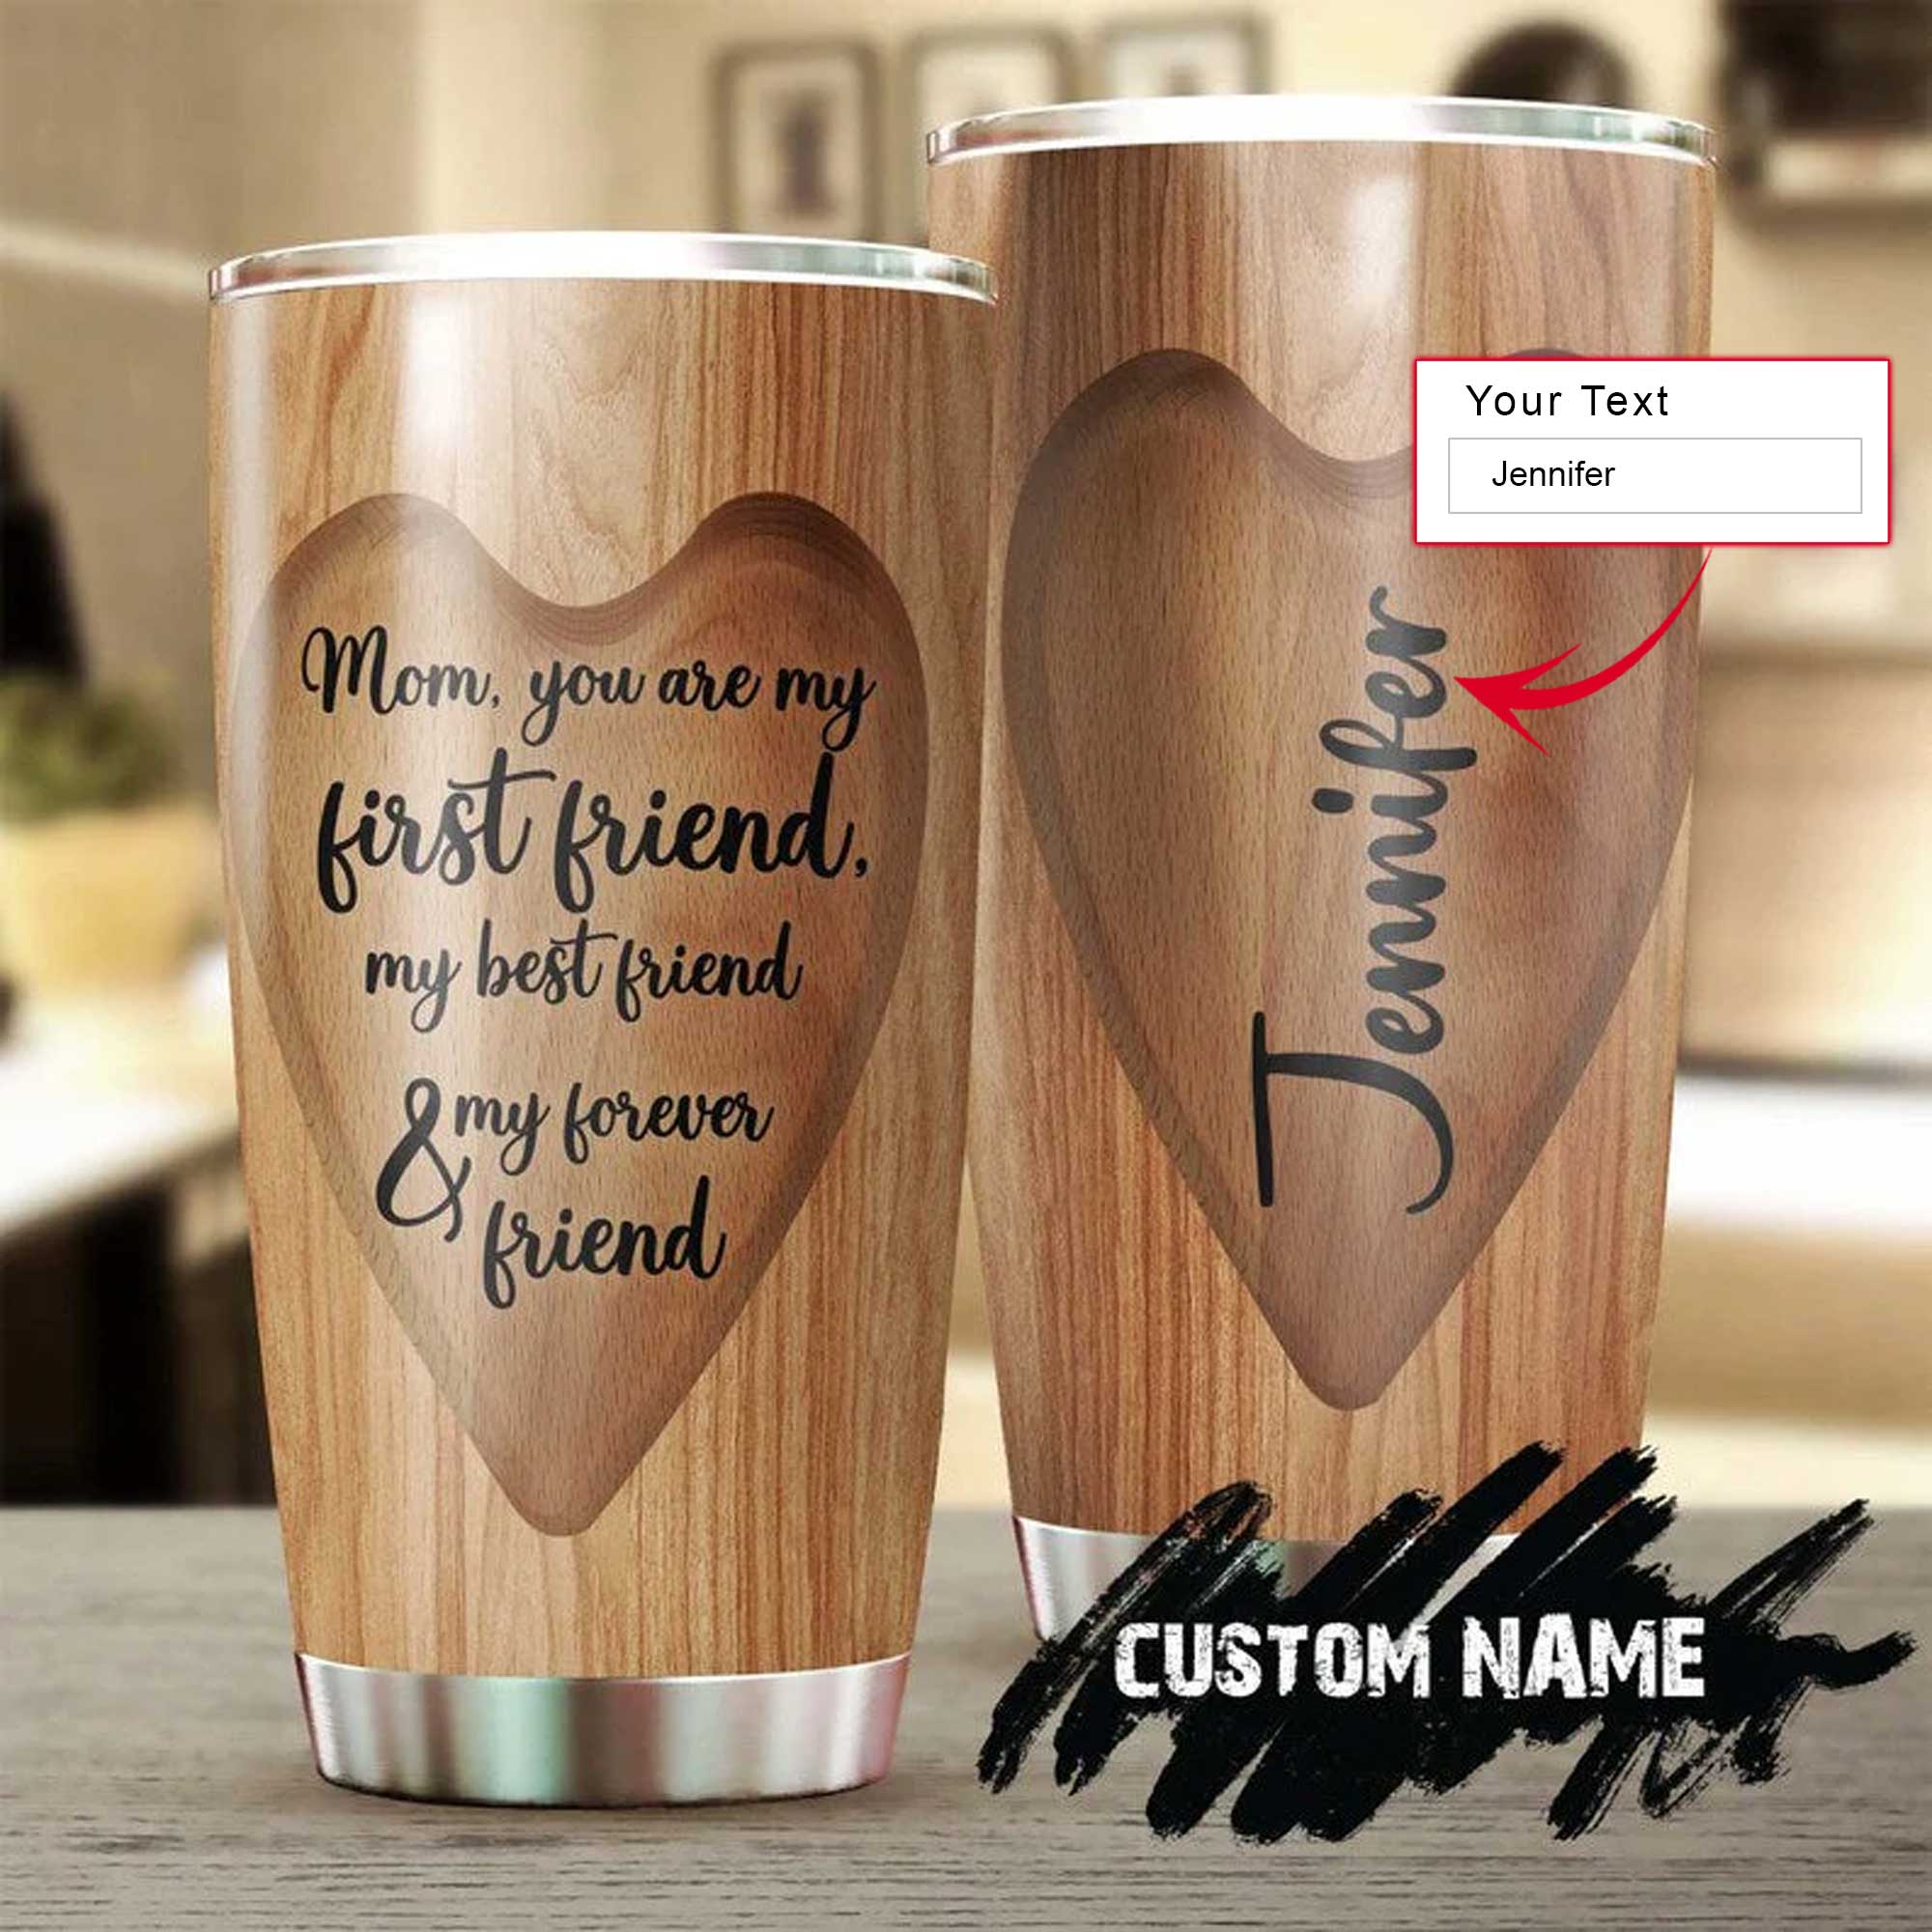 Personalized Mother's Day Gift Tumbler - Custom Gift For Mother's Day, Presents For Mom - You Are My First Friend Best Friend Forever Friend Tumbler